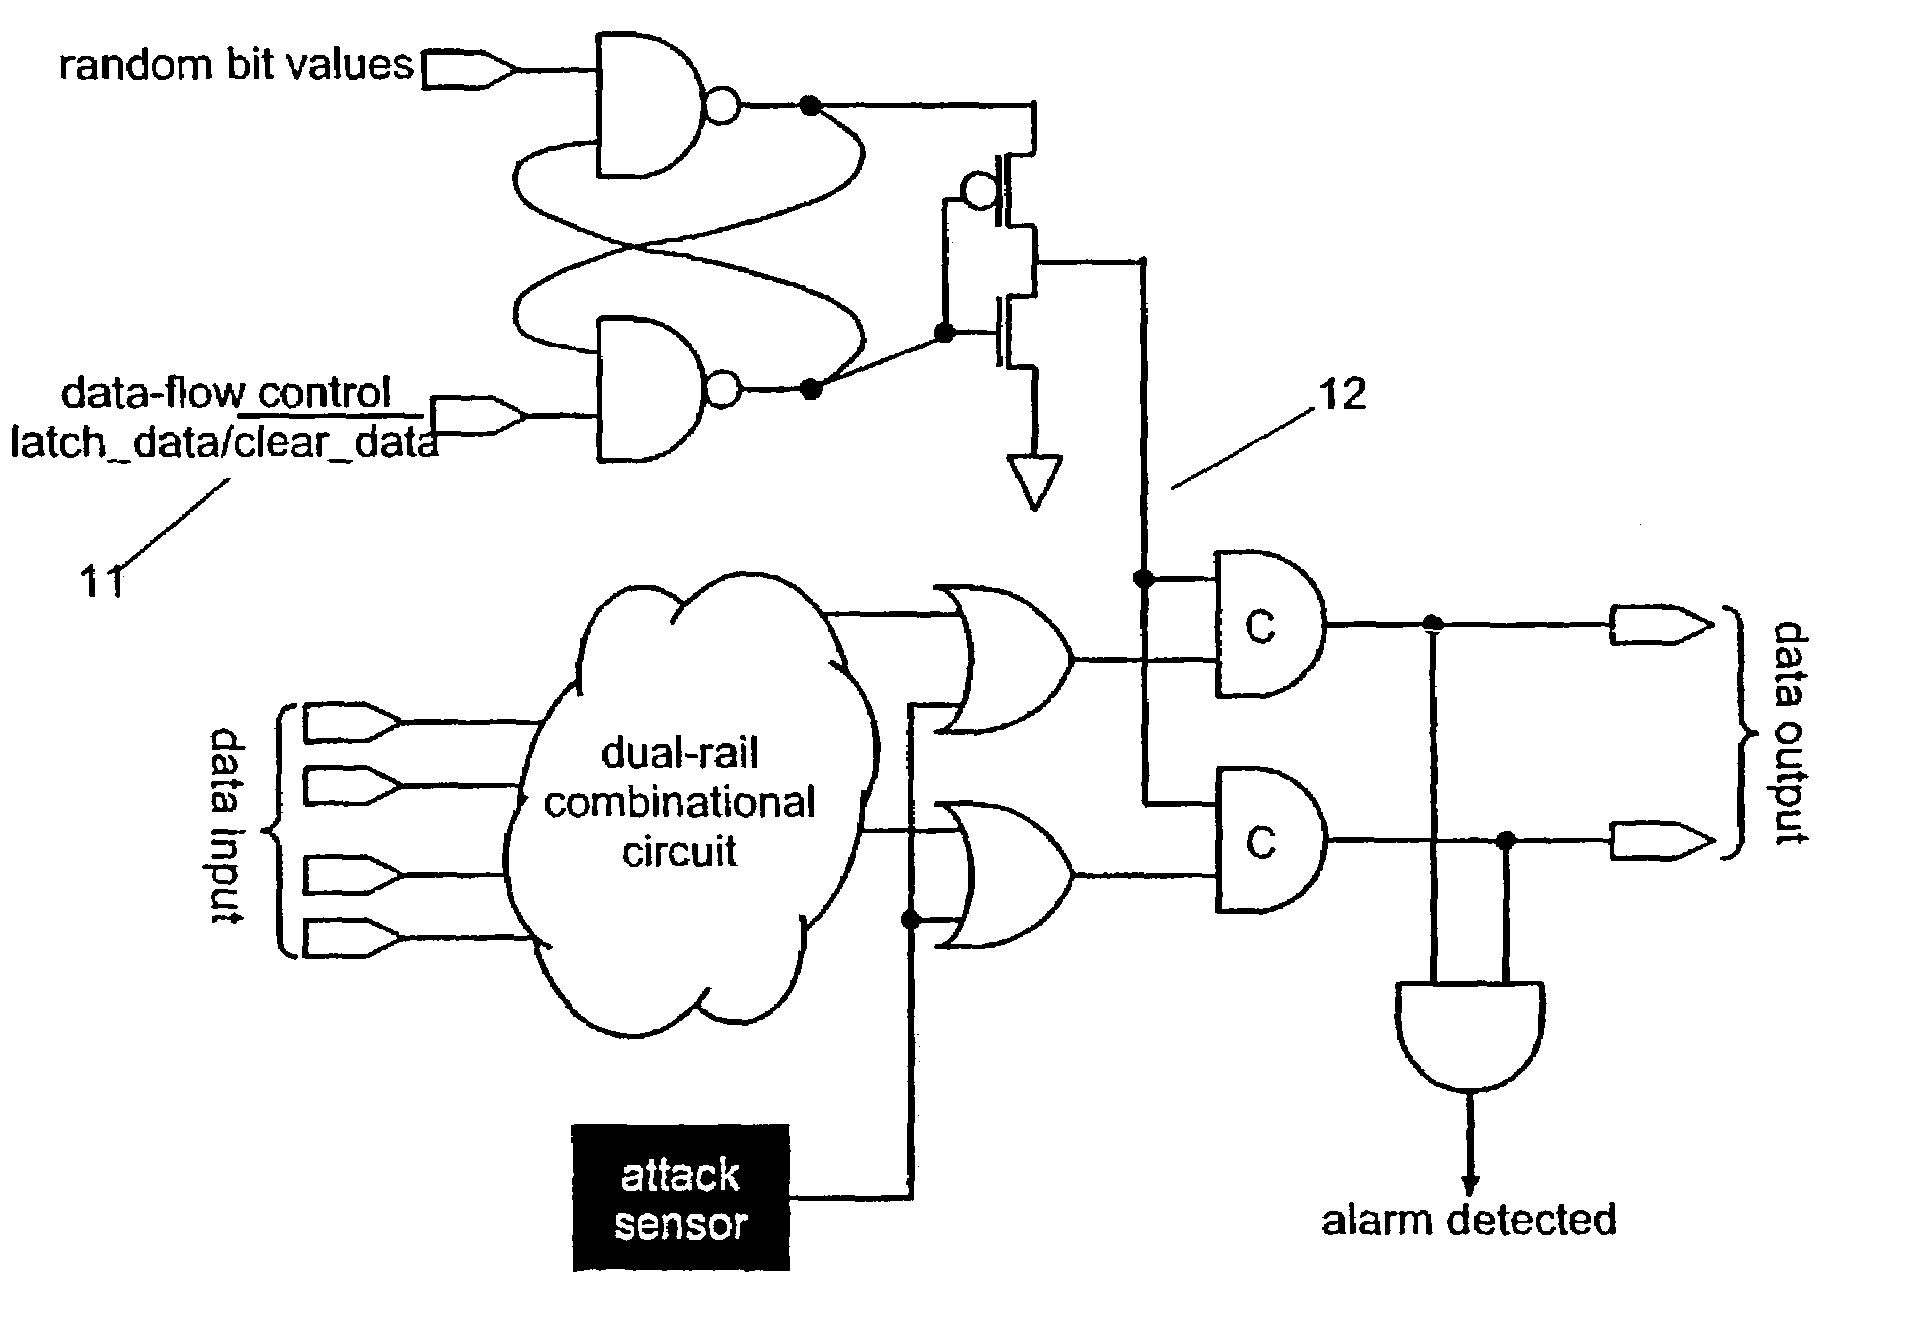 Microprocessor resistant to power analysis